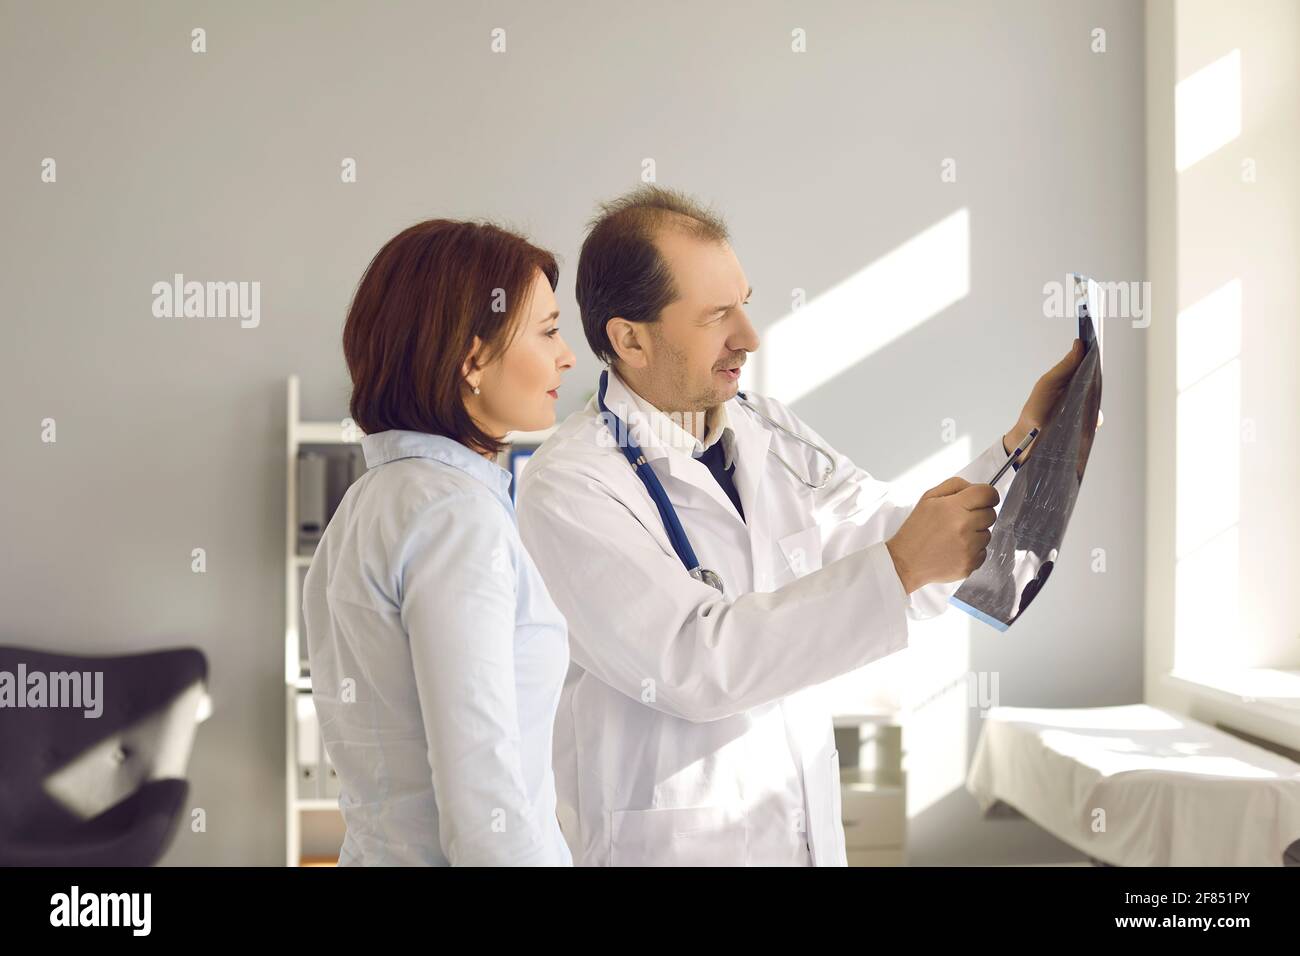 Doctor in the hospital office shows and explains to the patient an MRI scan or X-ray. Stock Photo